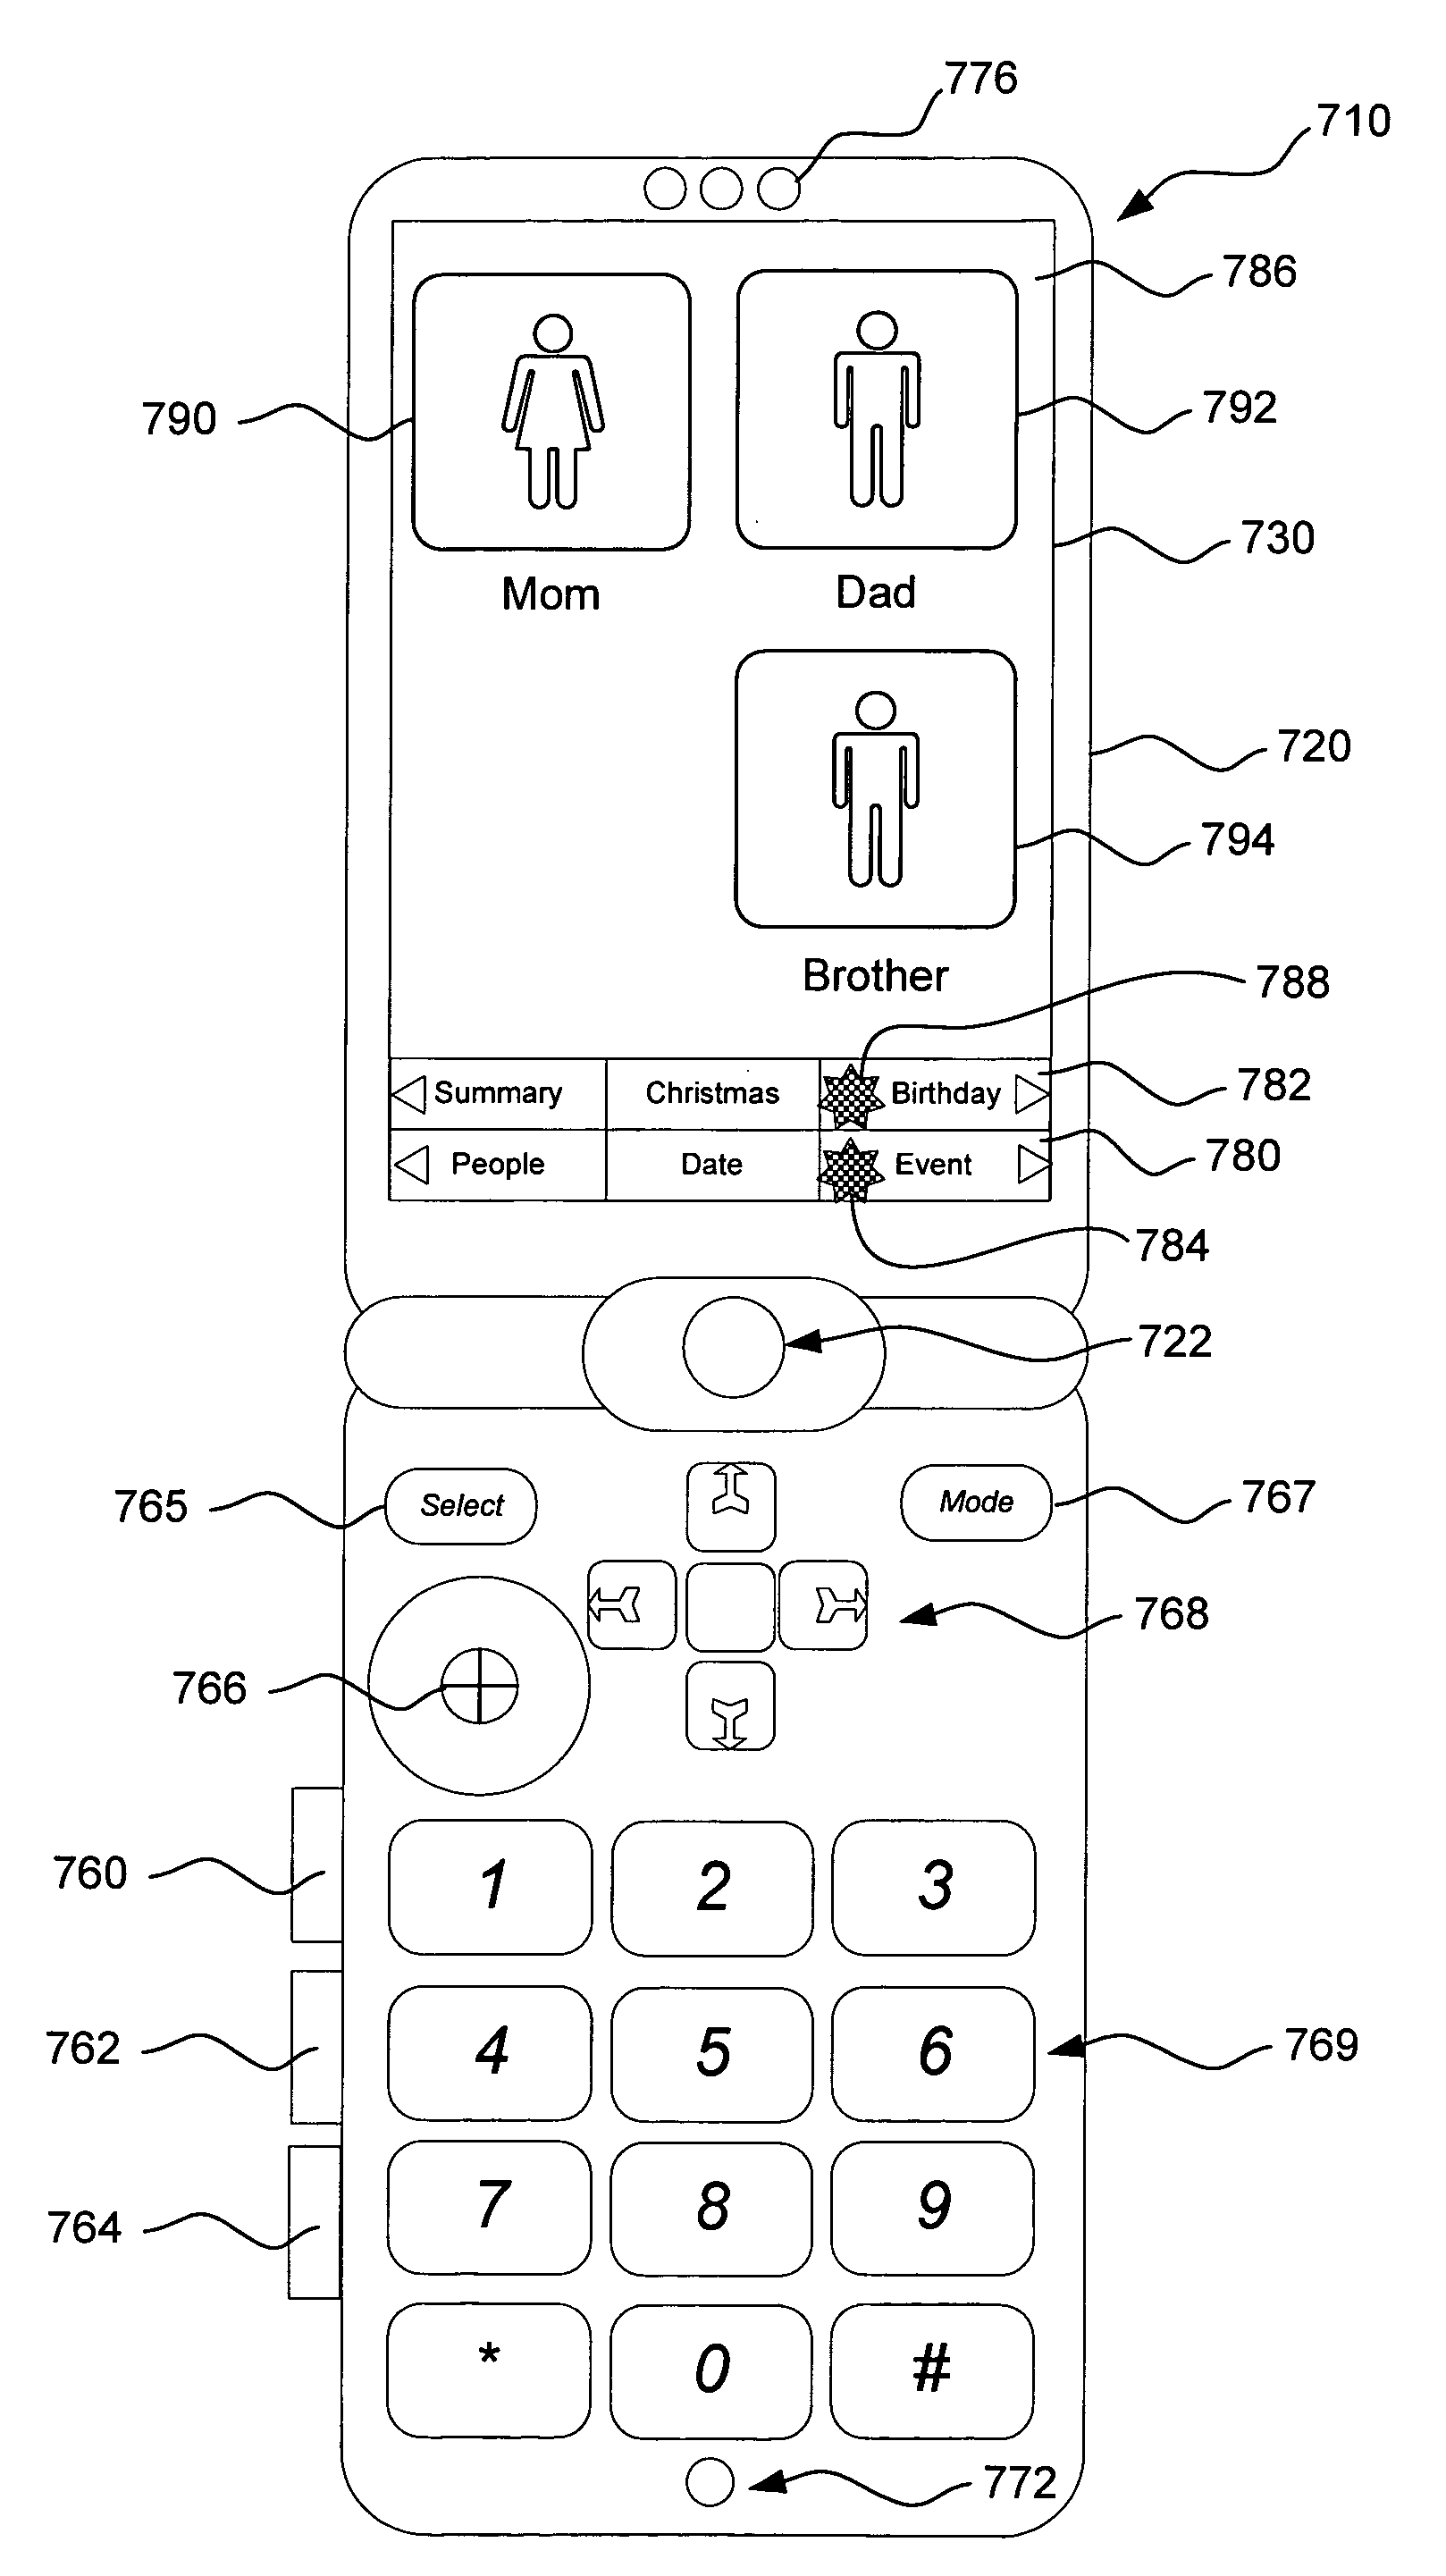 Method and system for browsing large digital multimedia object collections